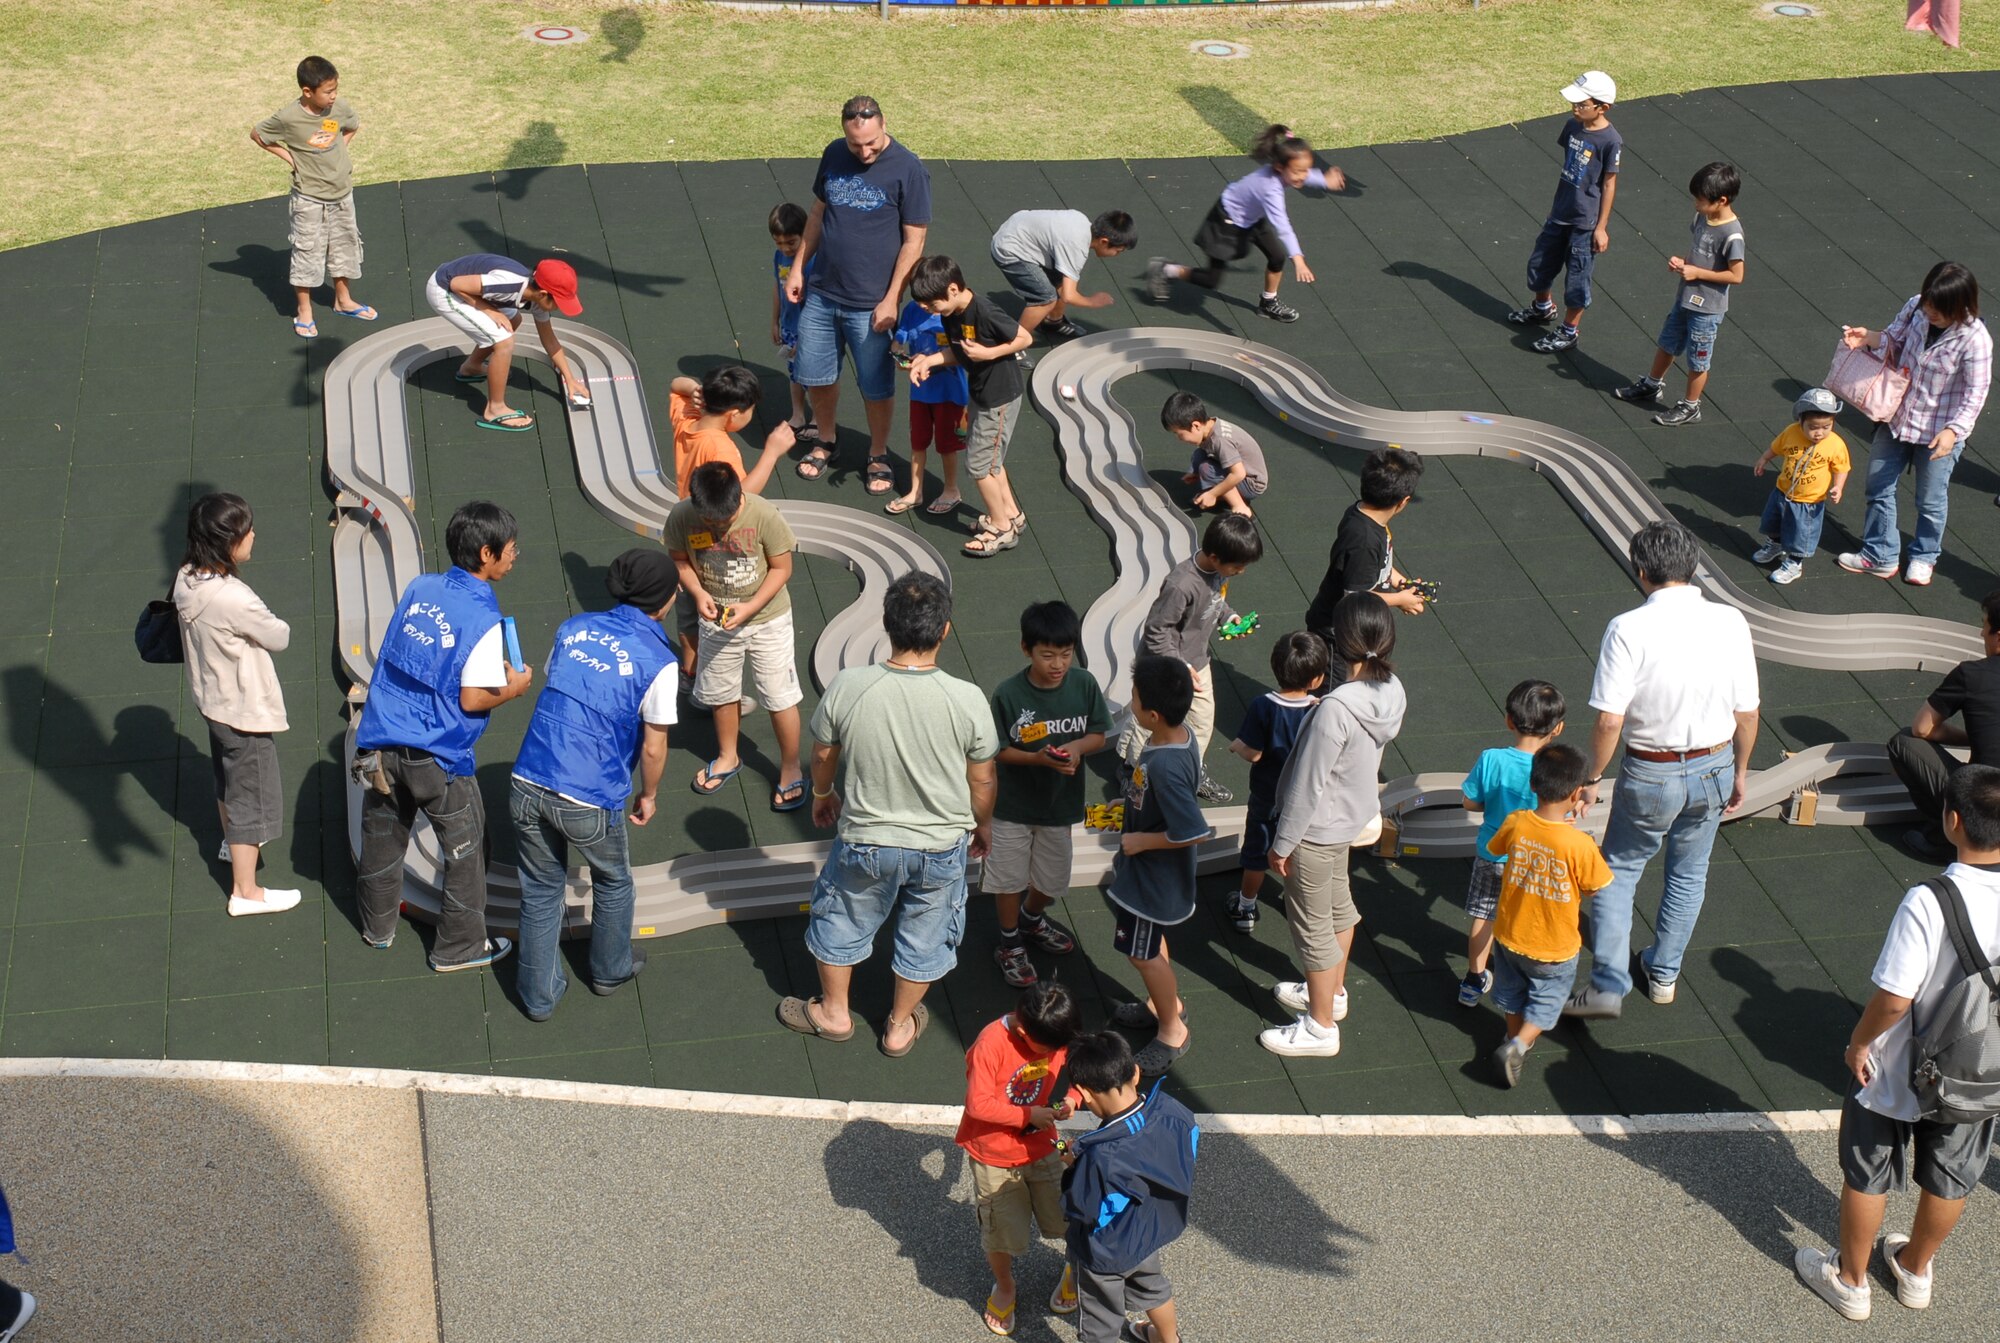 Spectators and competitors gather around the racetrack at the Okinawa City Children’s Zoo April 27. More than 50 American and Okinawan children took part in the building and racing of the battery-operated cars. (U.S. Air Force photo/Airman Chad Warren)